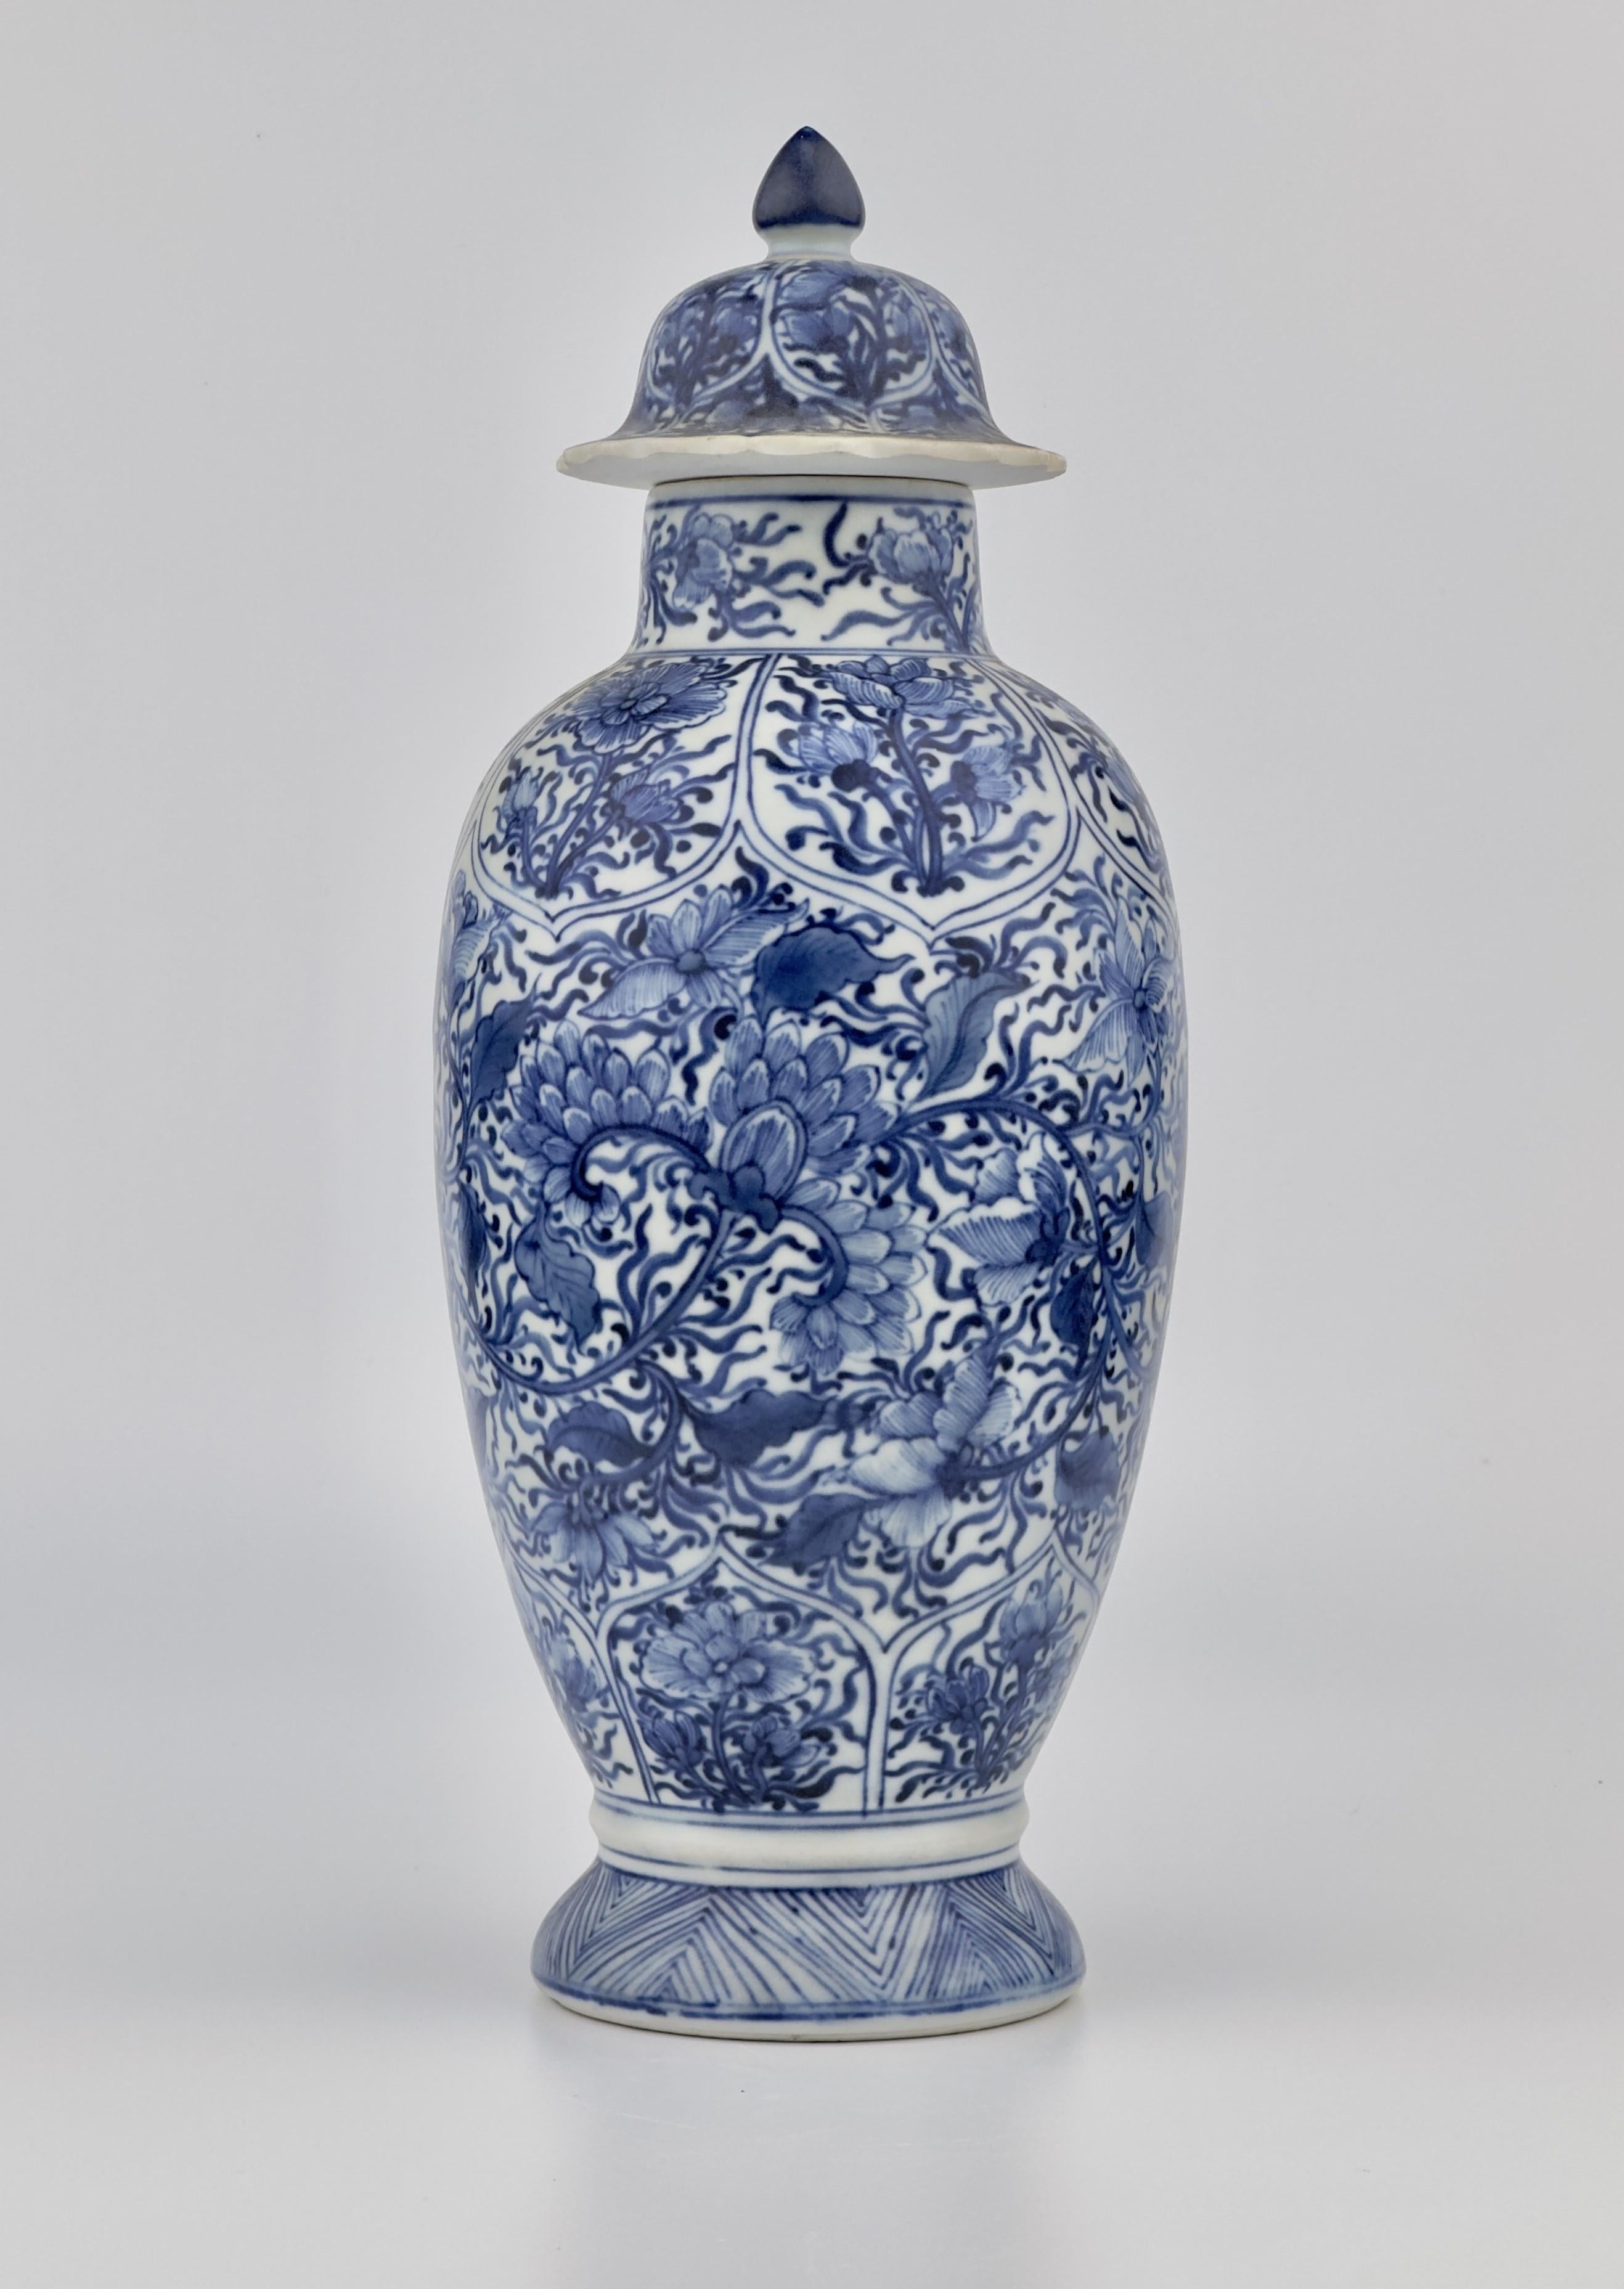 The baluster shaped vase rising from a splayed foot to a short waisted neck, decorated in underglaze blue with flower blooms borne on leafy stems.

Period : Qing Dynasty, Kangxi reign
Production Date : 1690-1699
Made in : Jingdezhen
Destination :